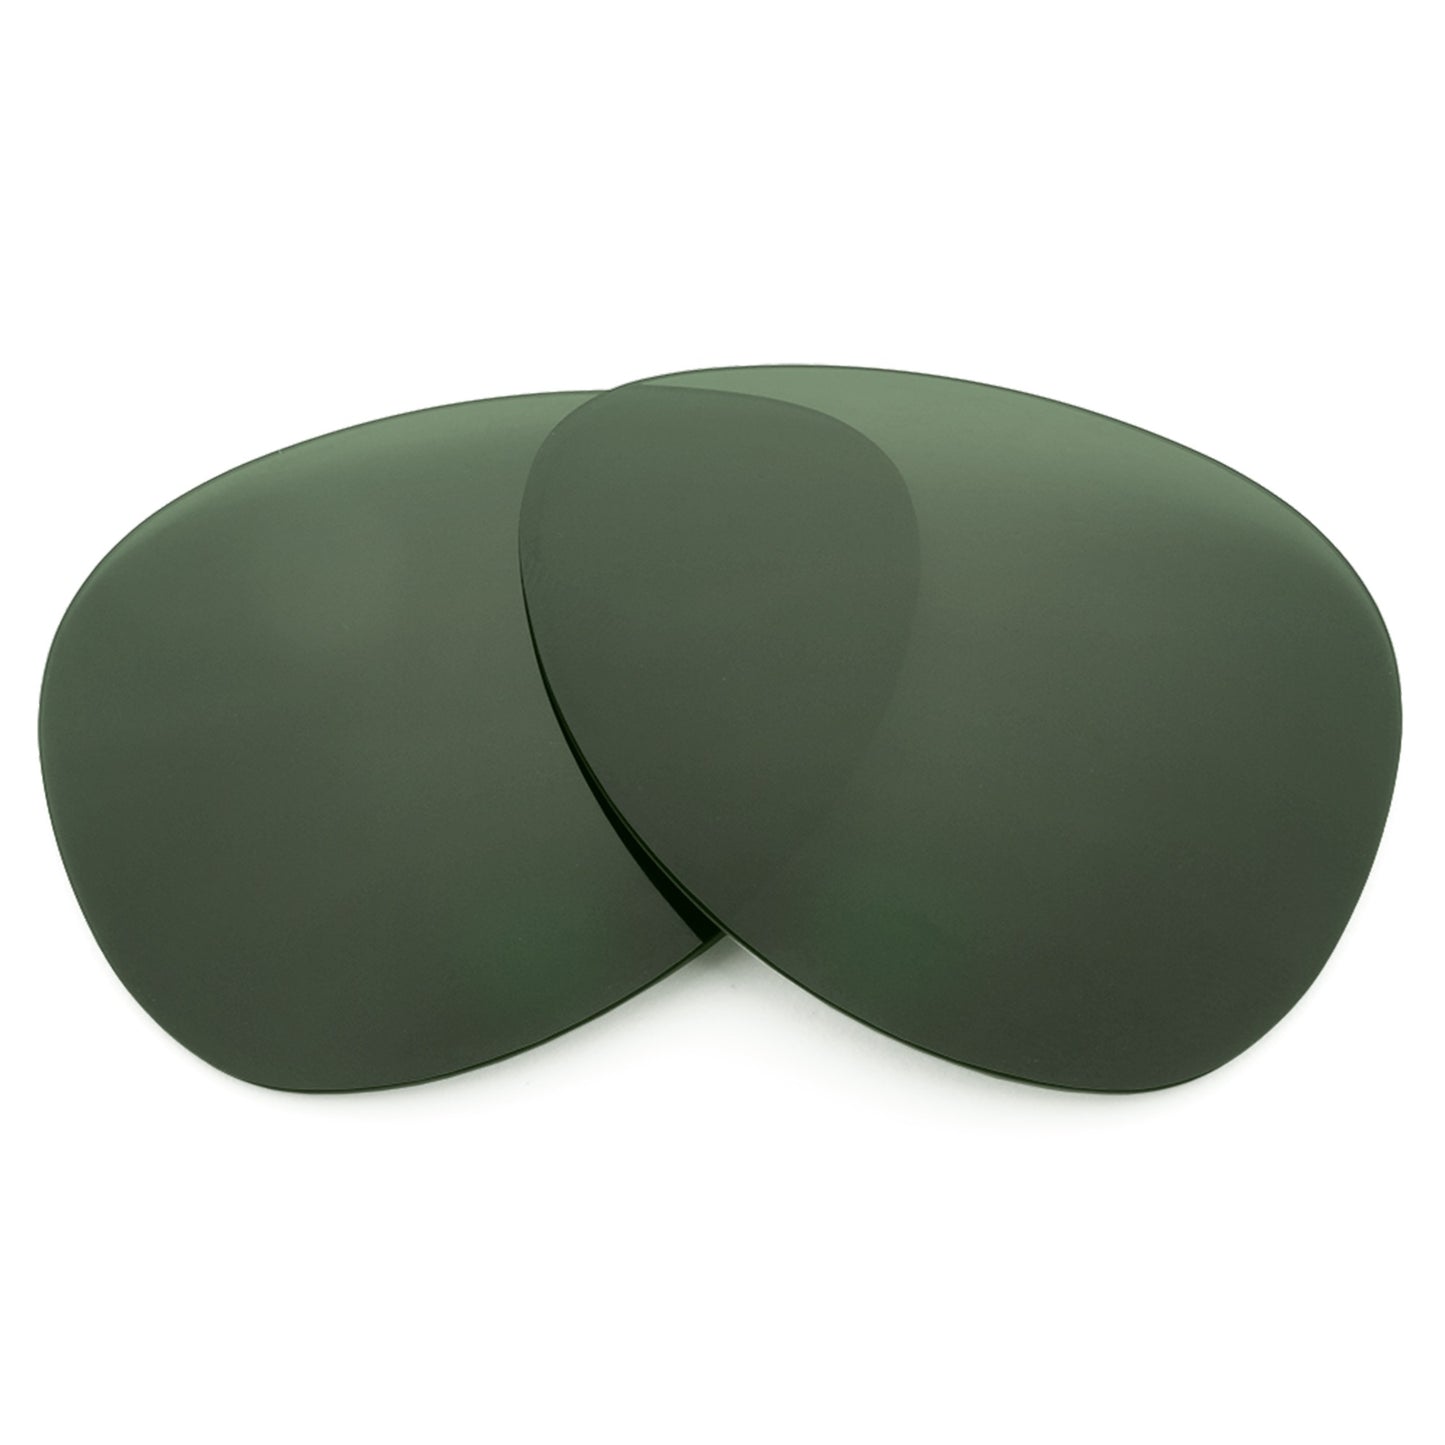 Revant replacement lenses for Ray-Ban Aviator RB3025 58mm Polarized Gray Green